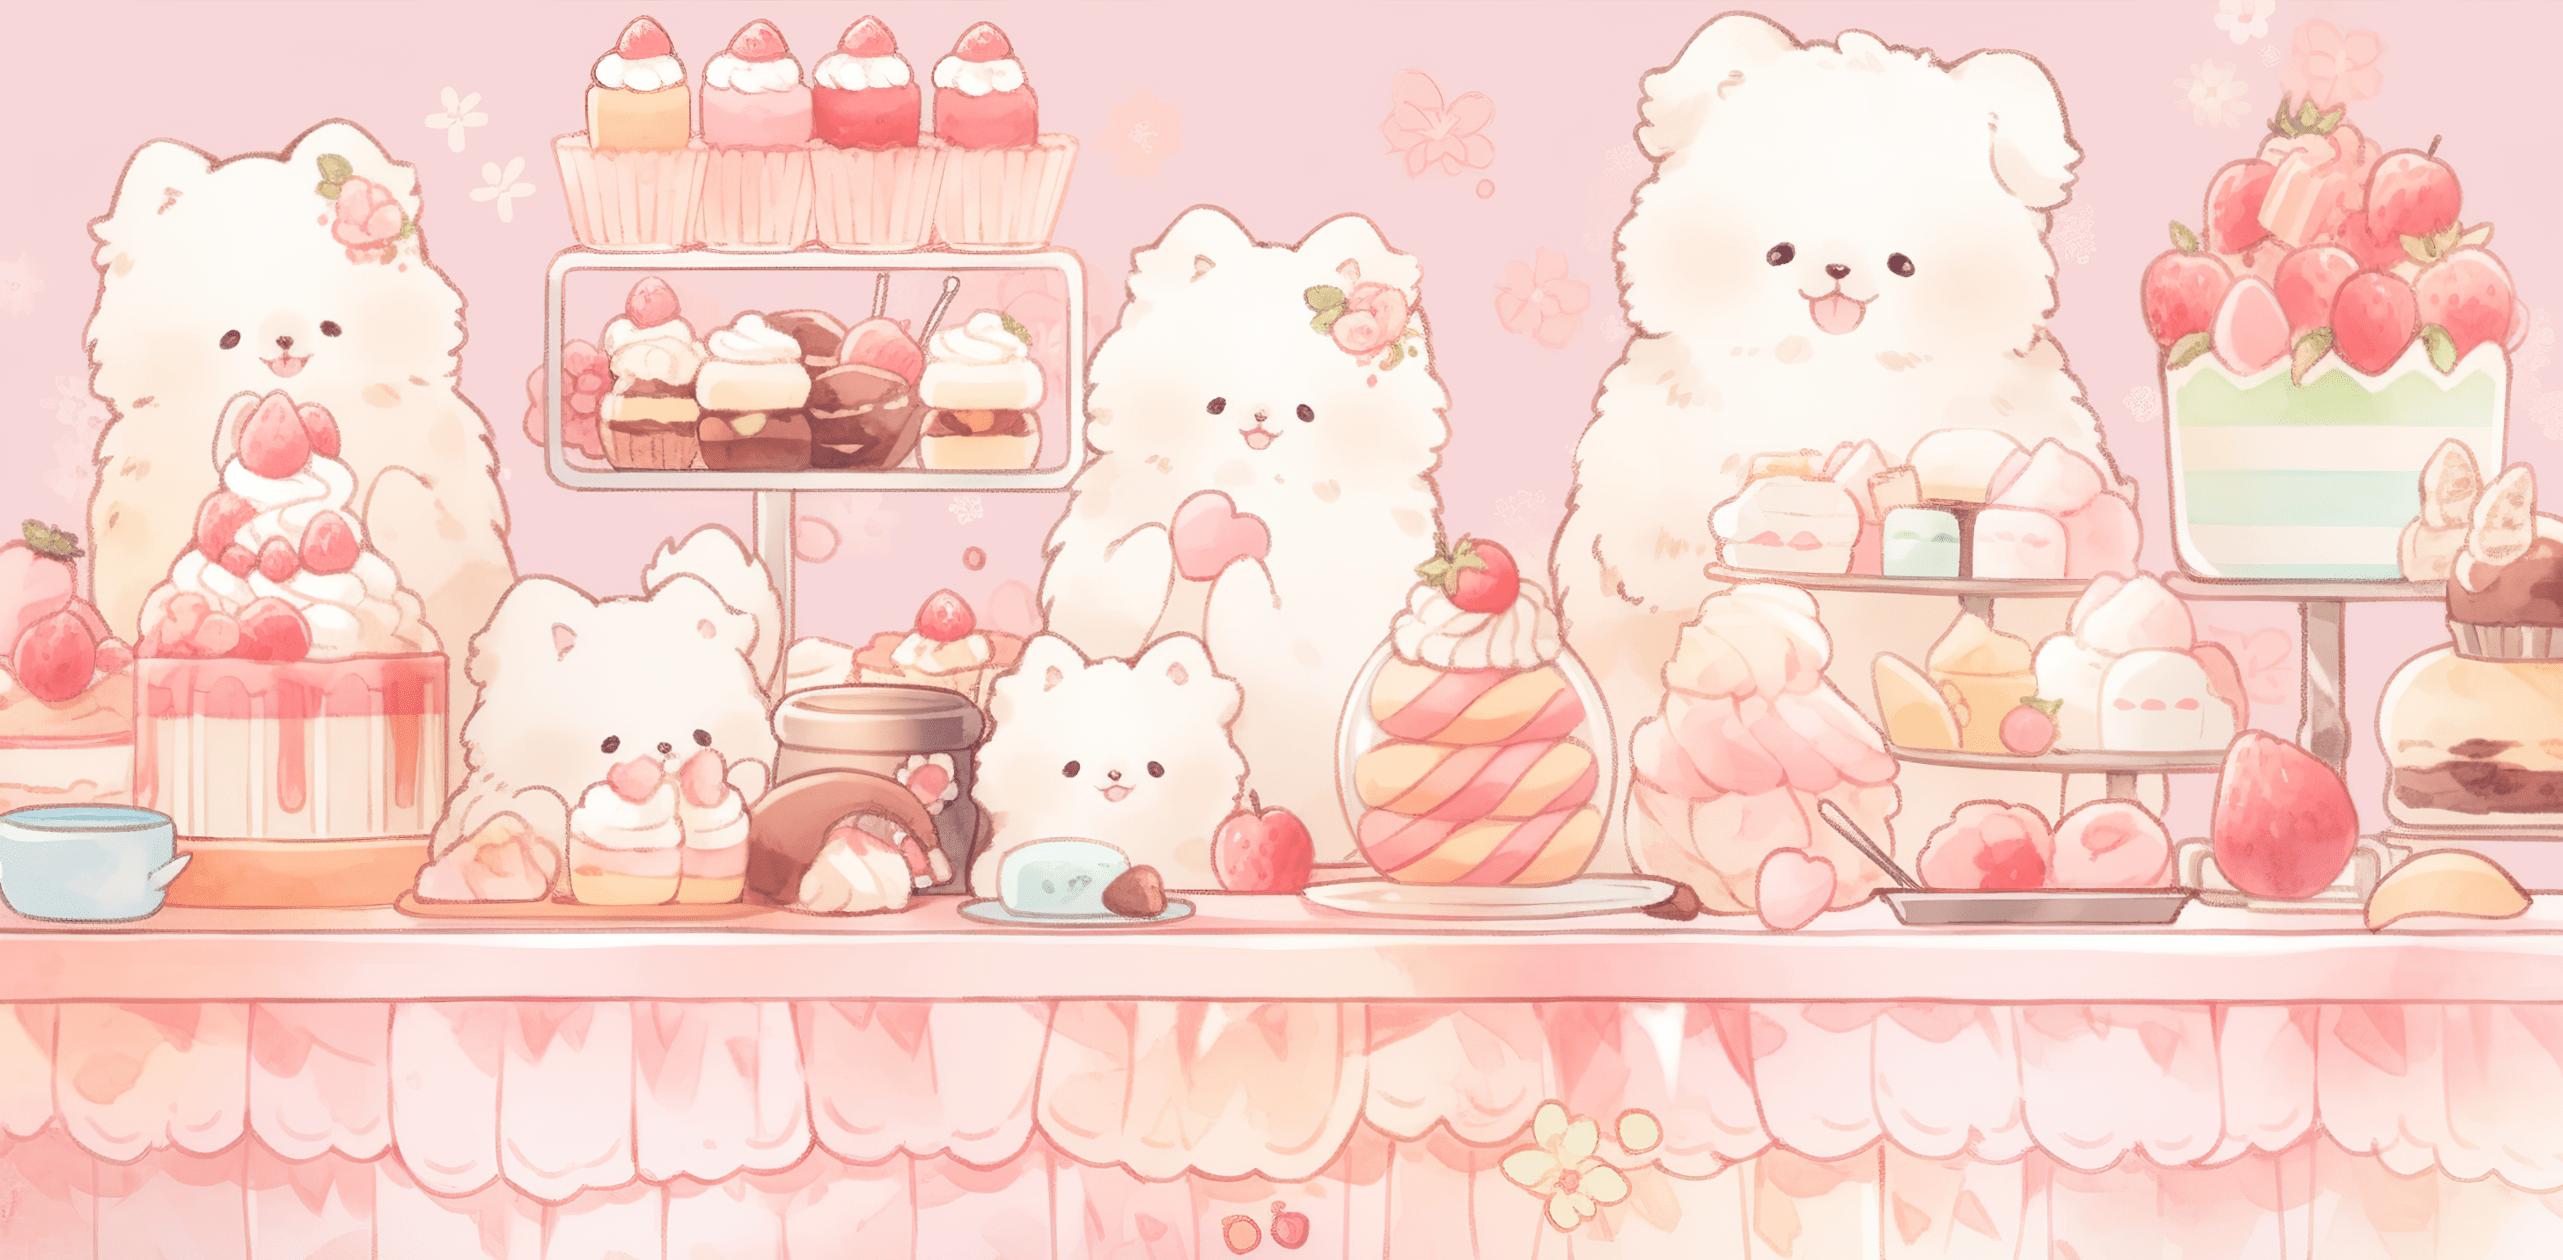 A wallpaper of a cute dog cafe with dogs and cakes - Kawaii